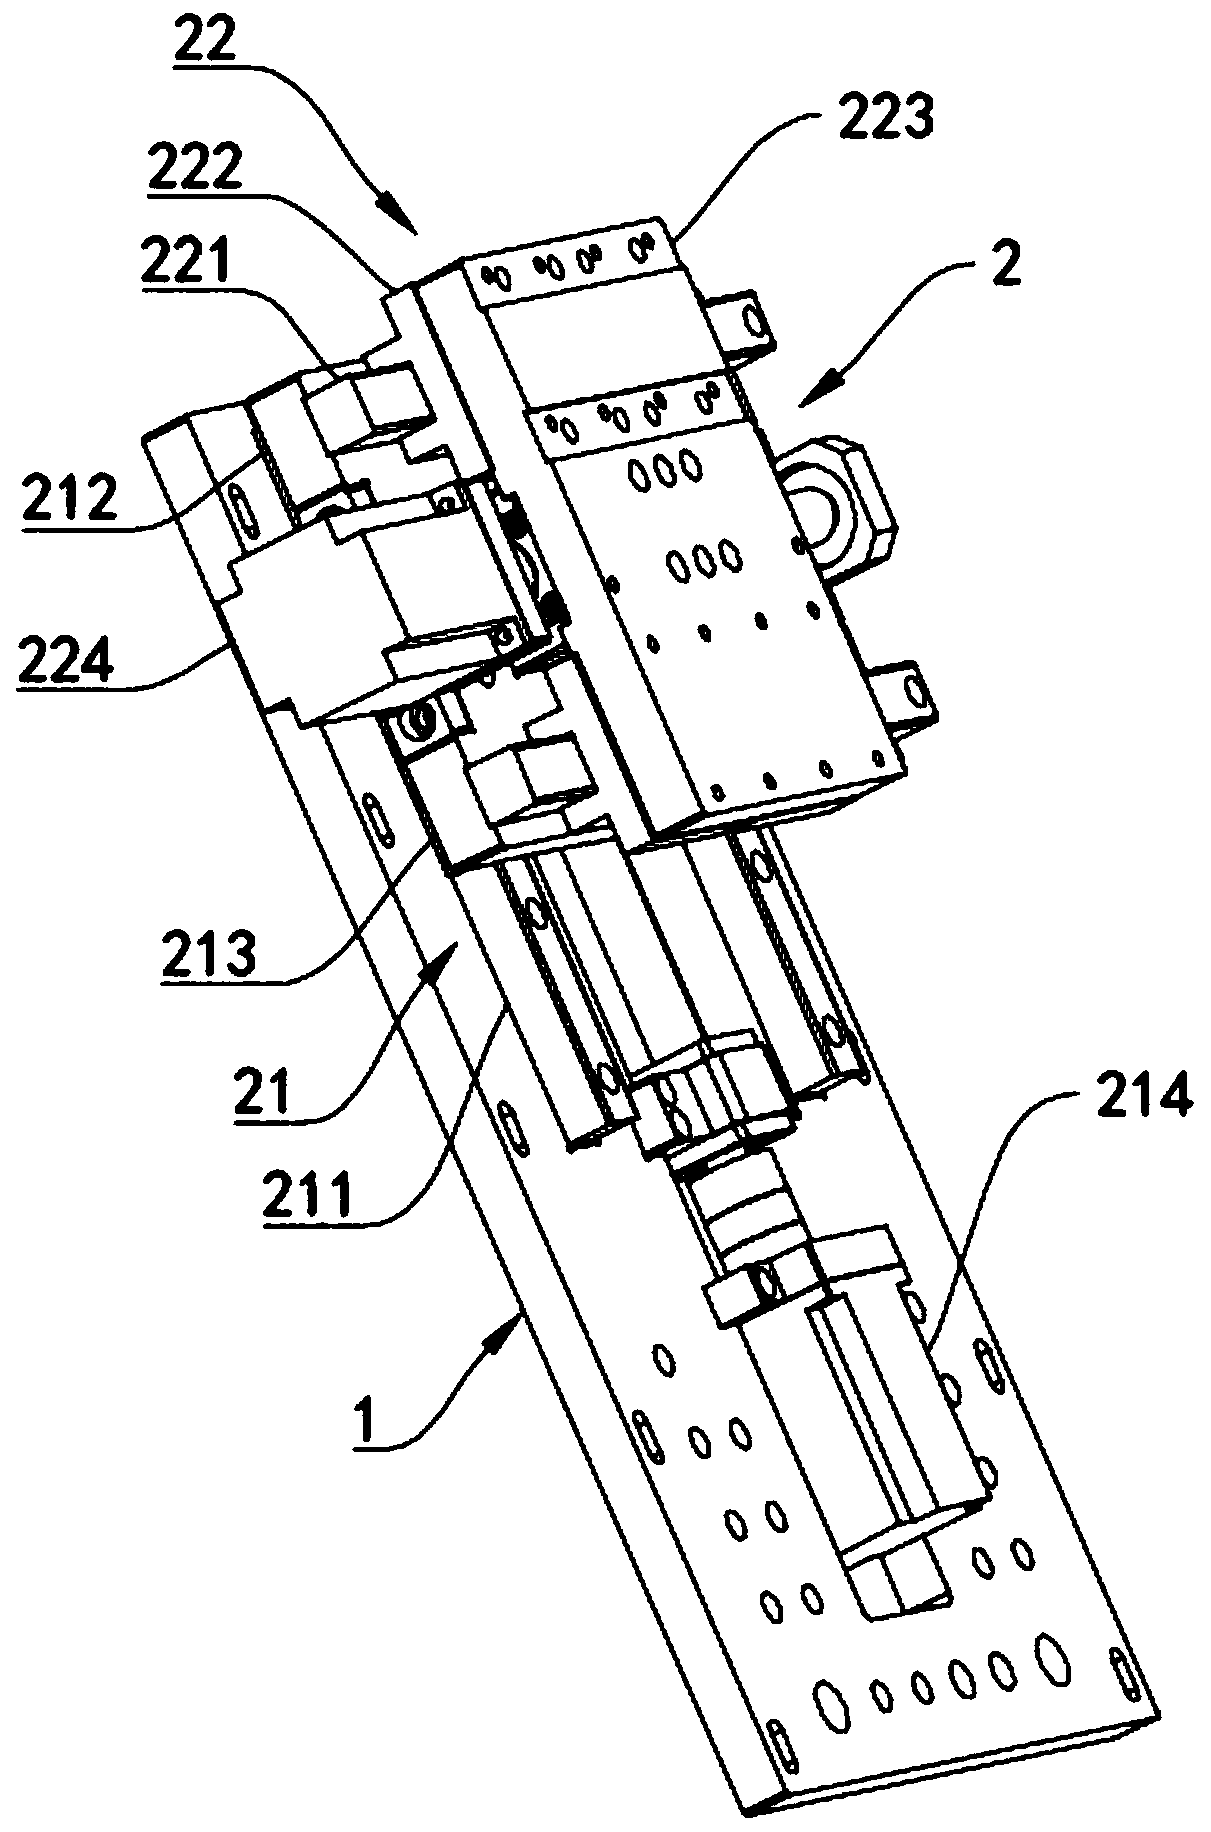 Pipe bending device, and left direction and right direction sharing pipe bender head with same